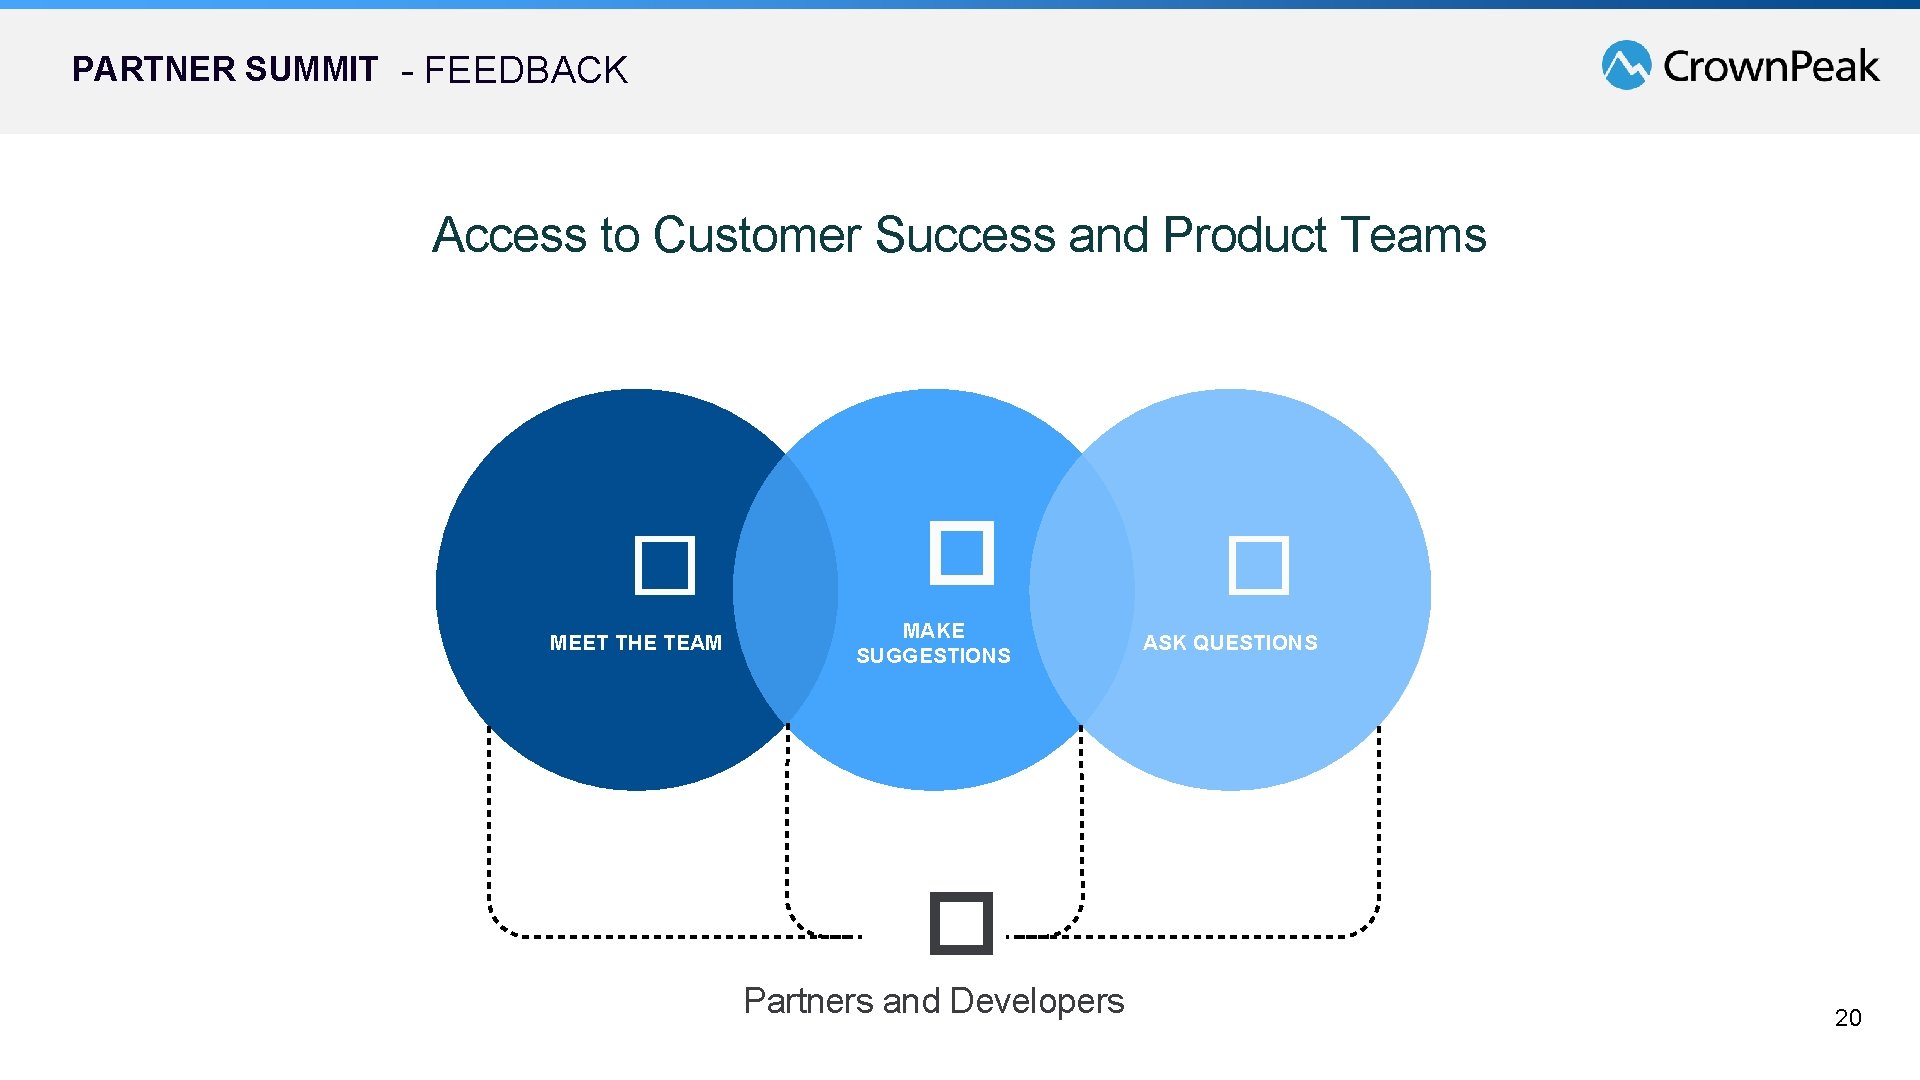 PARTNER SUMMIT - FEEDBACK Access to Customer Success and Product Teams � MEET THE